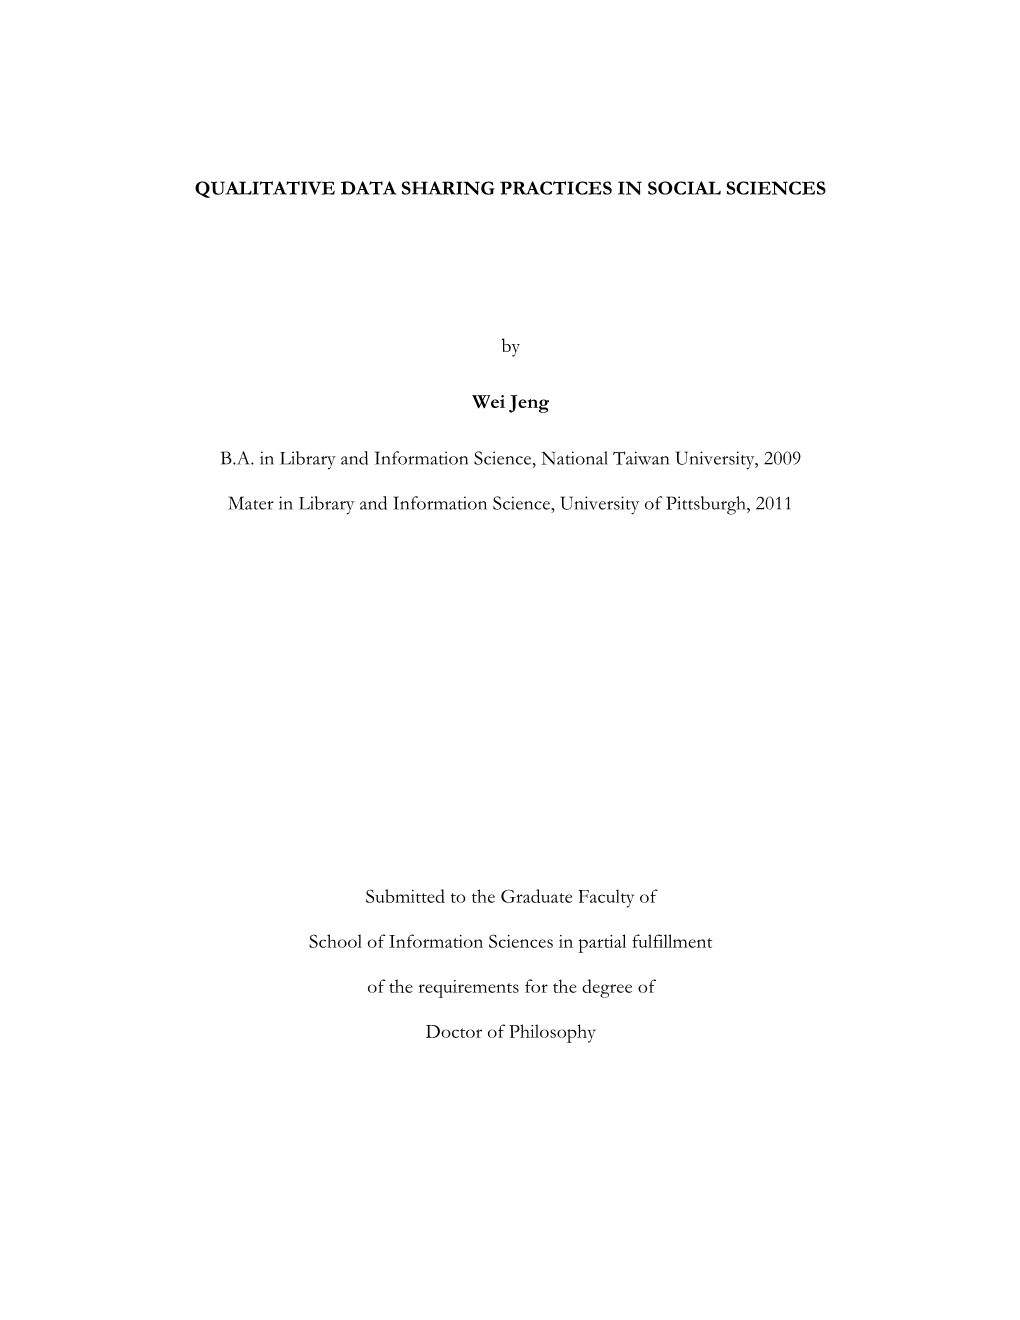 QUALITATIVE DATA SHARING PRACTICES in SOCIAL SCIENCES by Wei Jeng B.A. in Library and Information Science, National Taiwan Unive